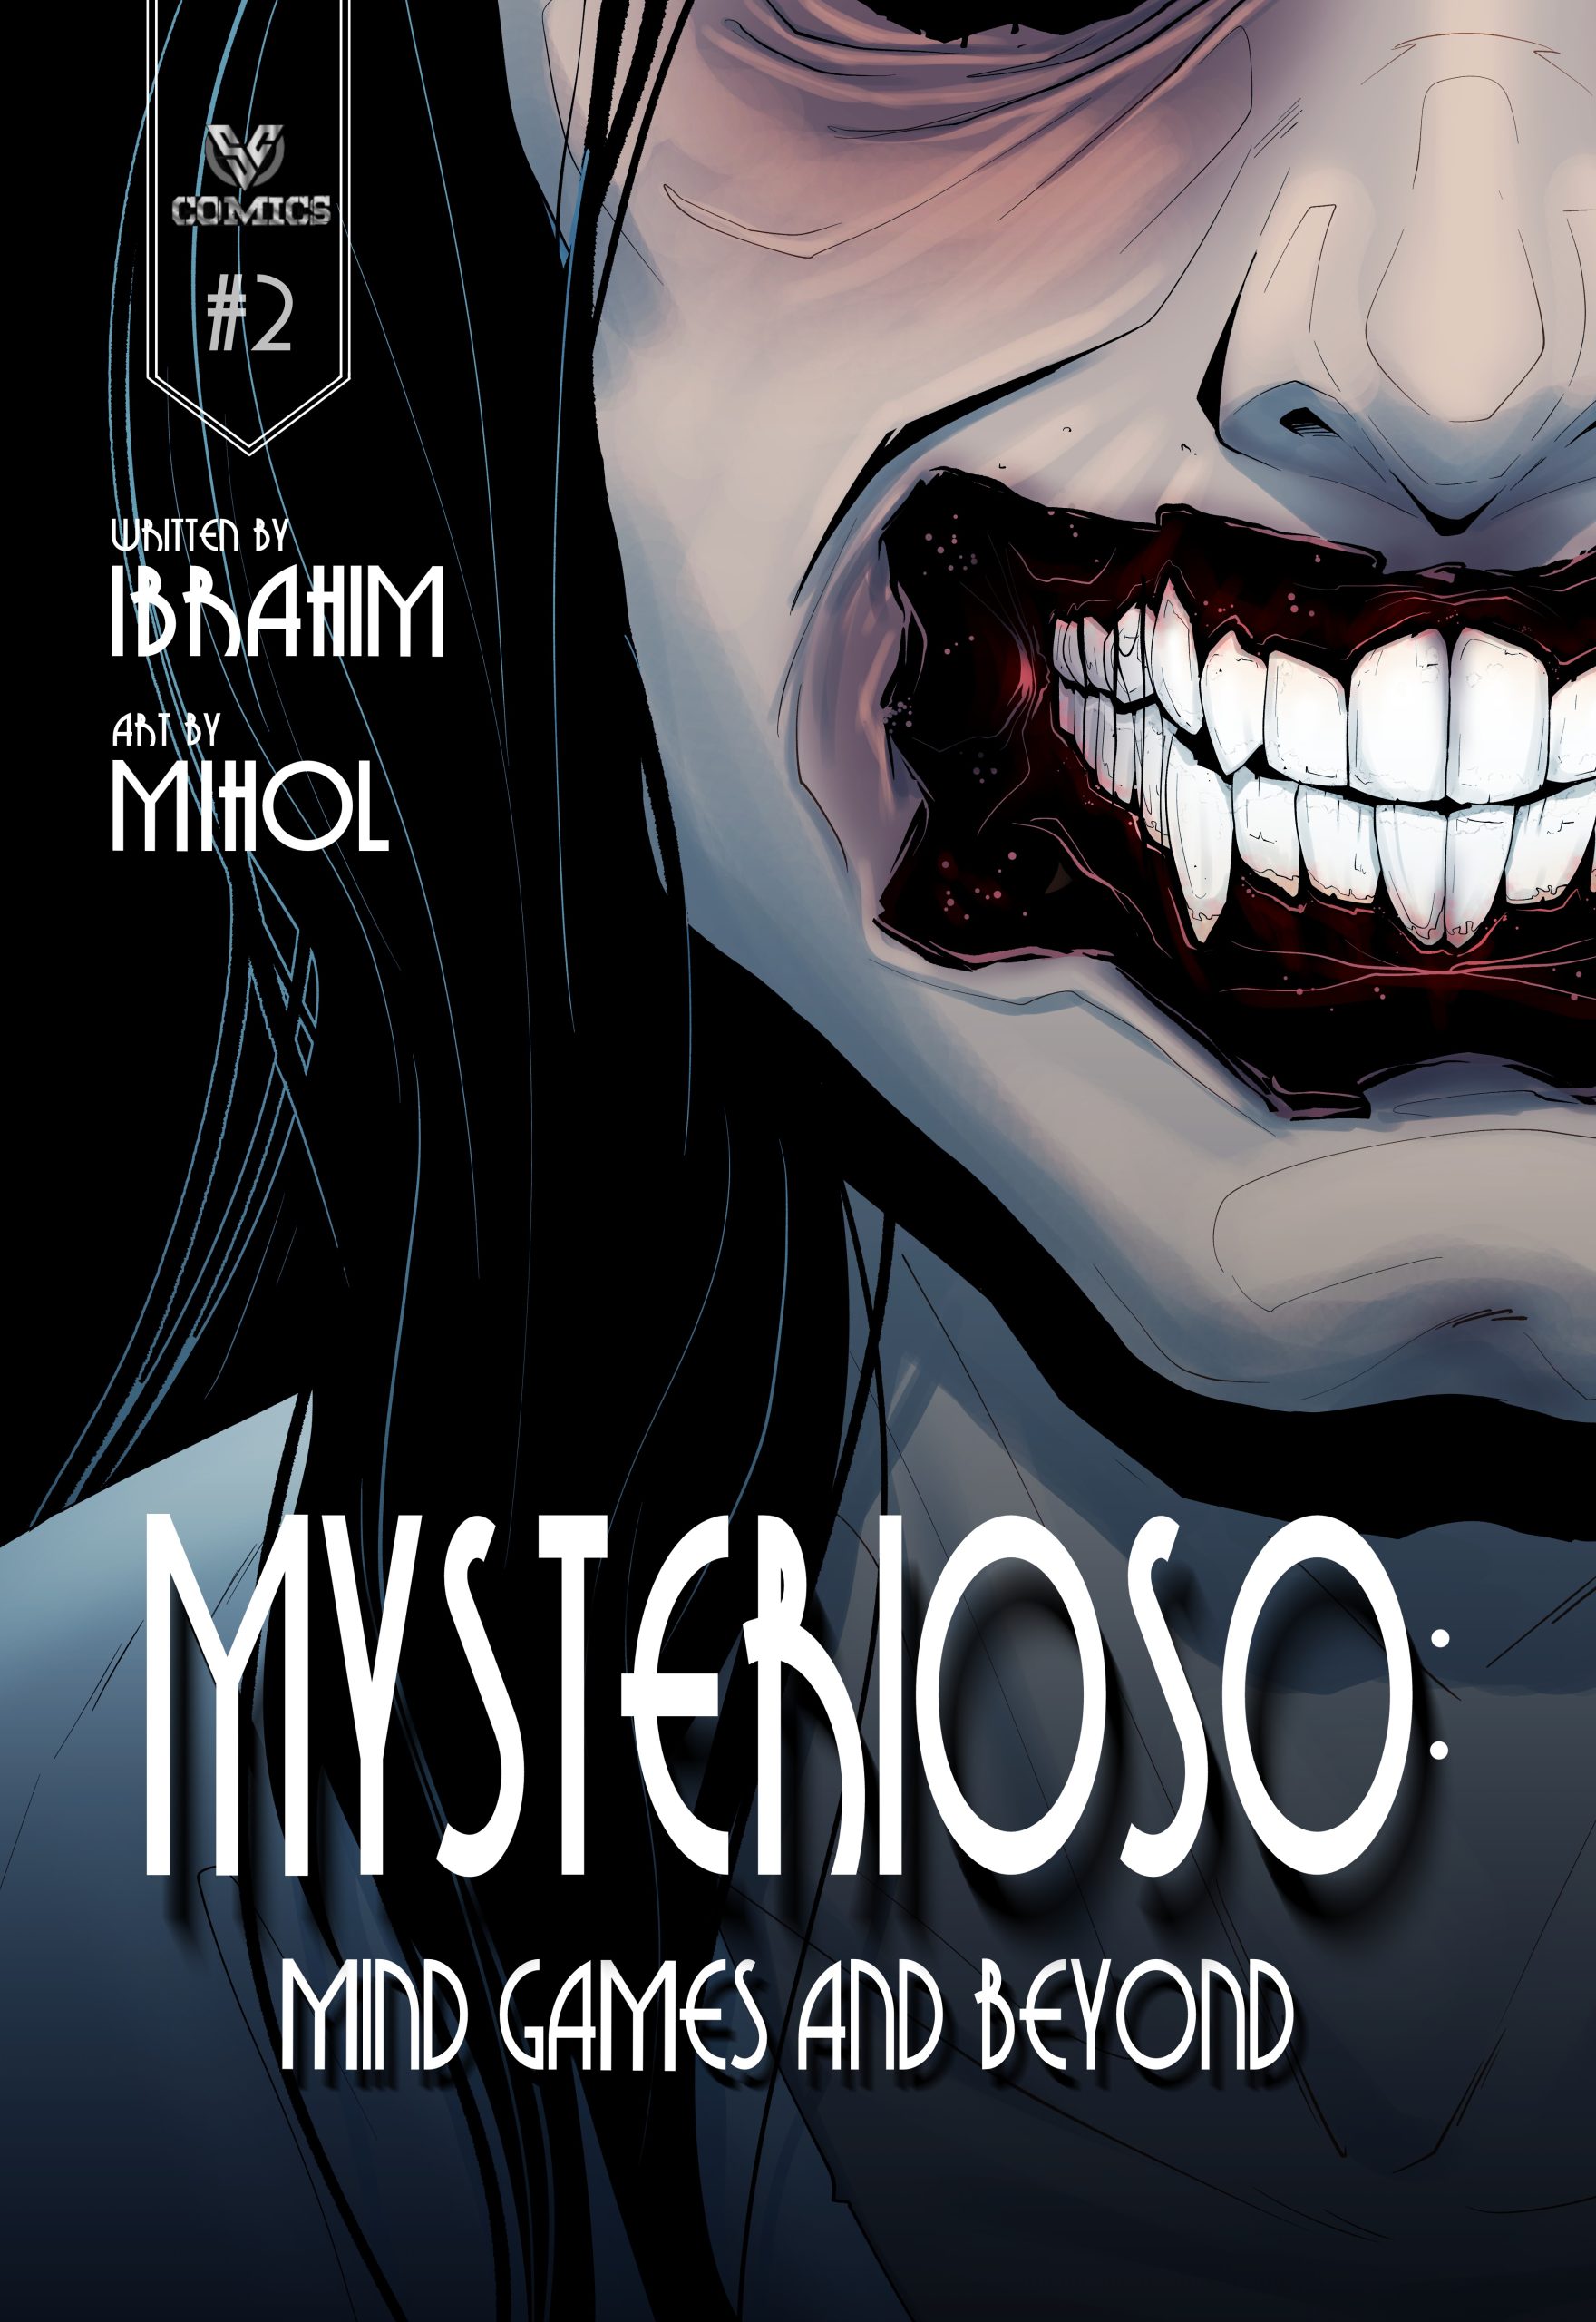 Mysterioso #2: Mind Games and Beyond